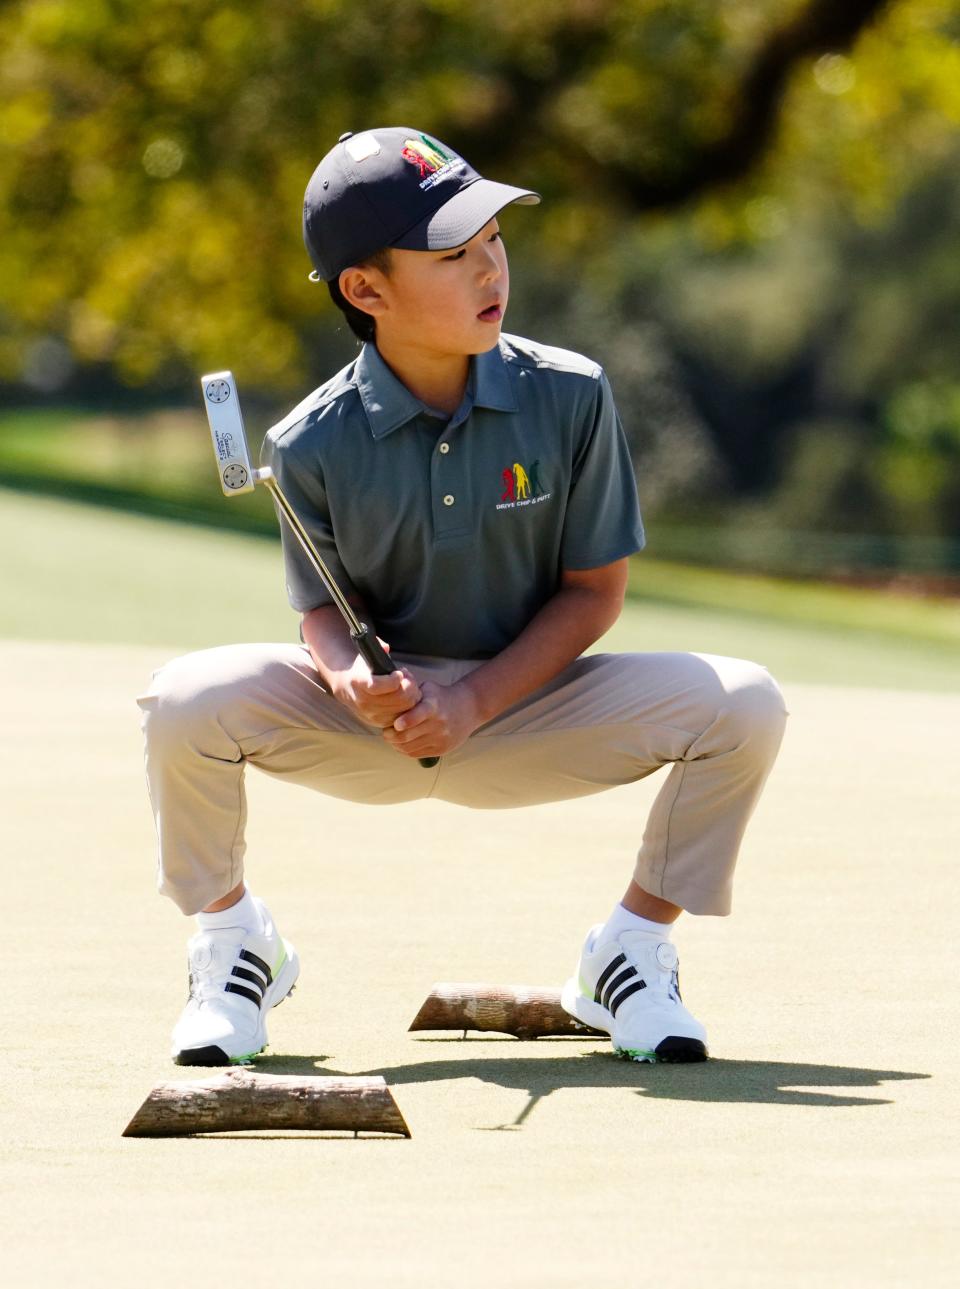 Ethan Jung from Fort Lee, N.J., watches one of his putts during the Drive, Chip & Putt National Finals competition at Augusta National Golf Club.